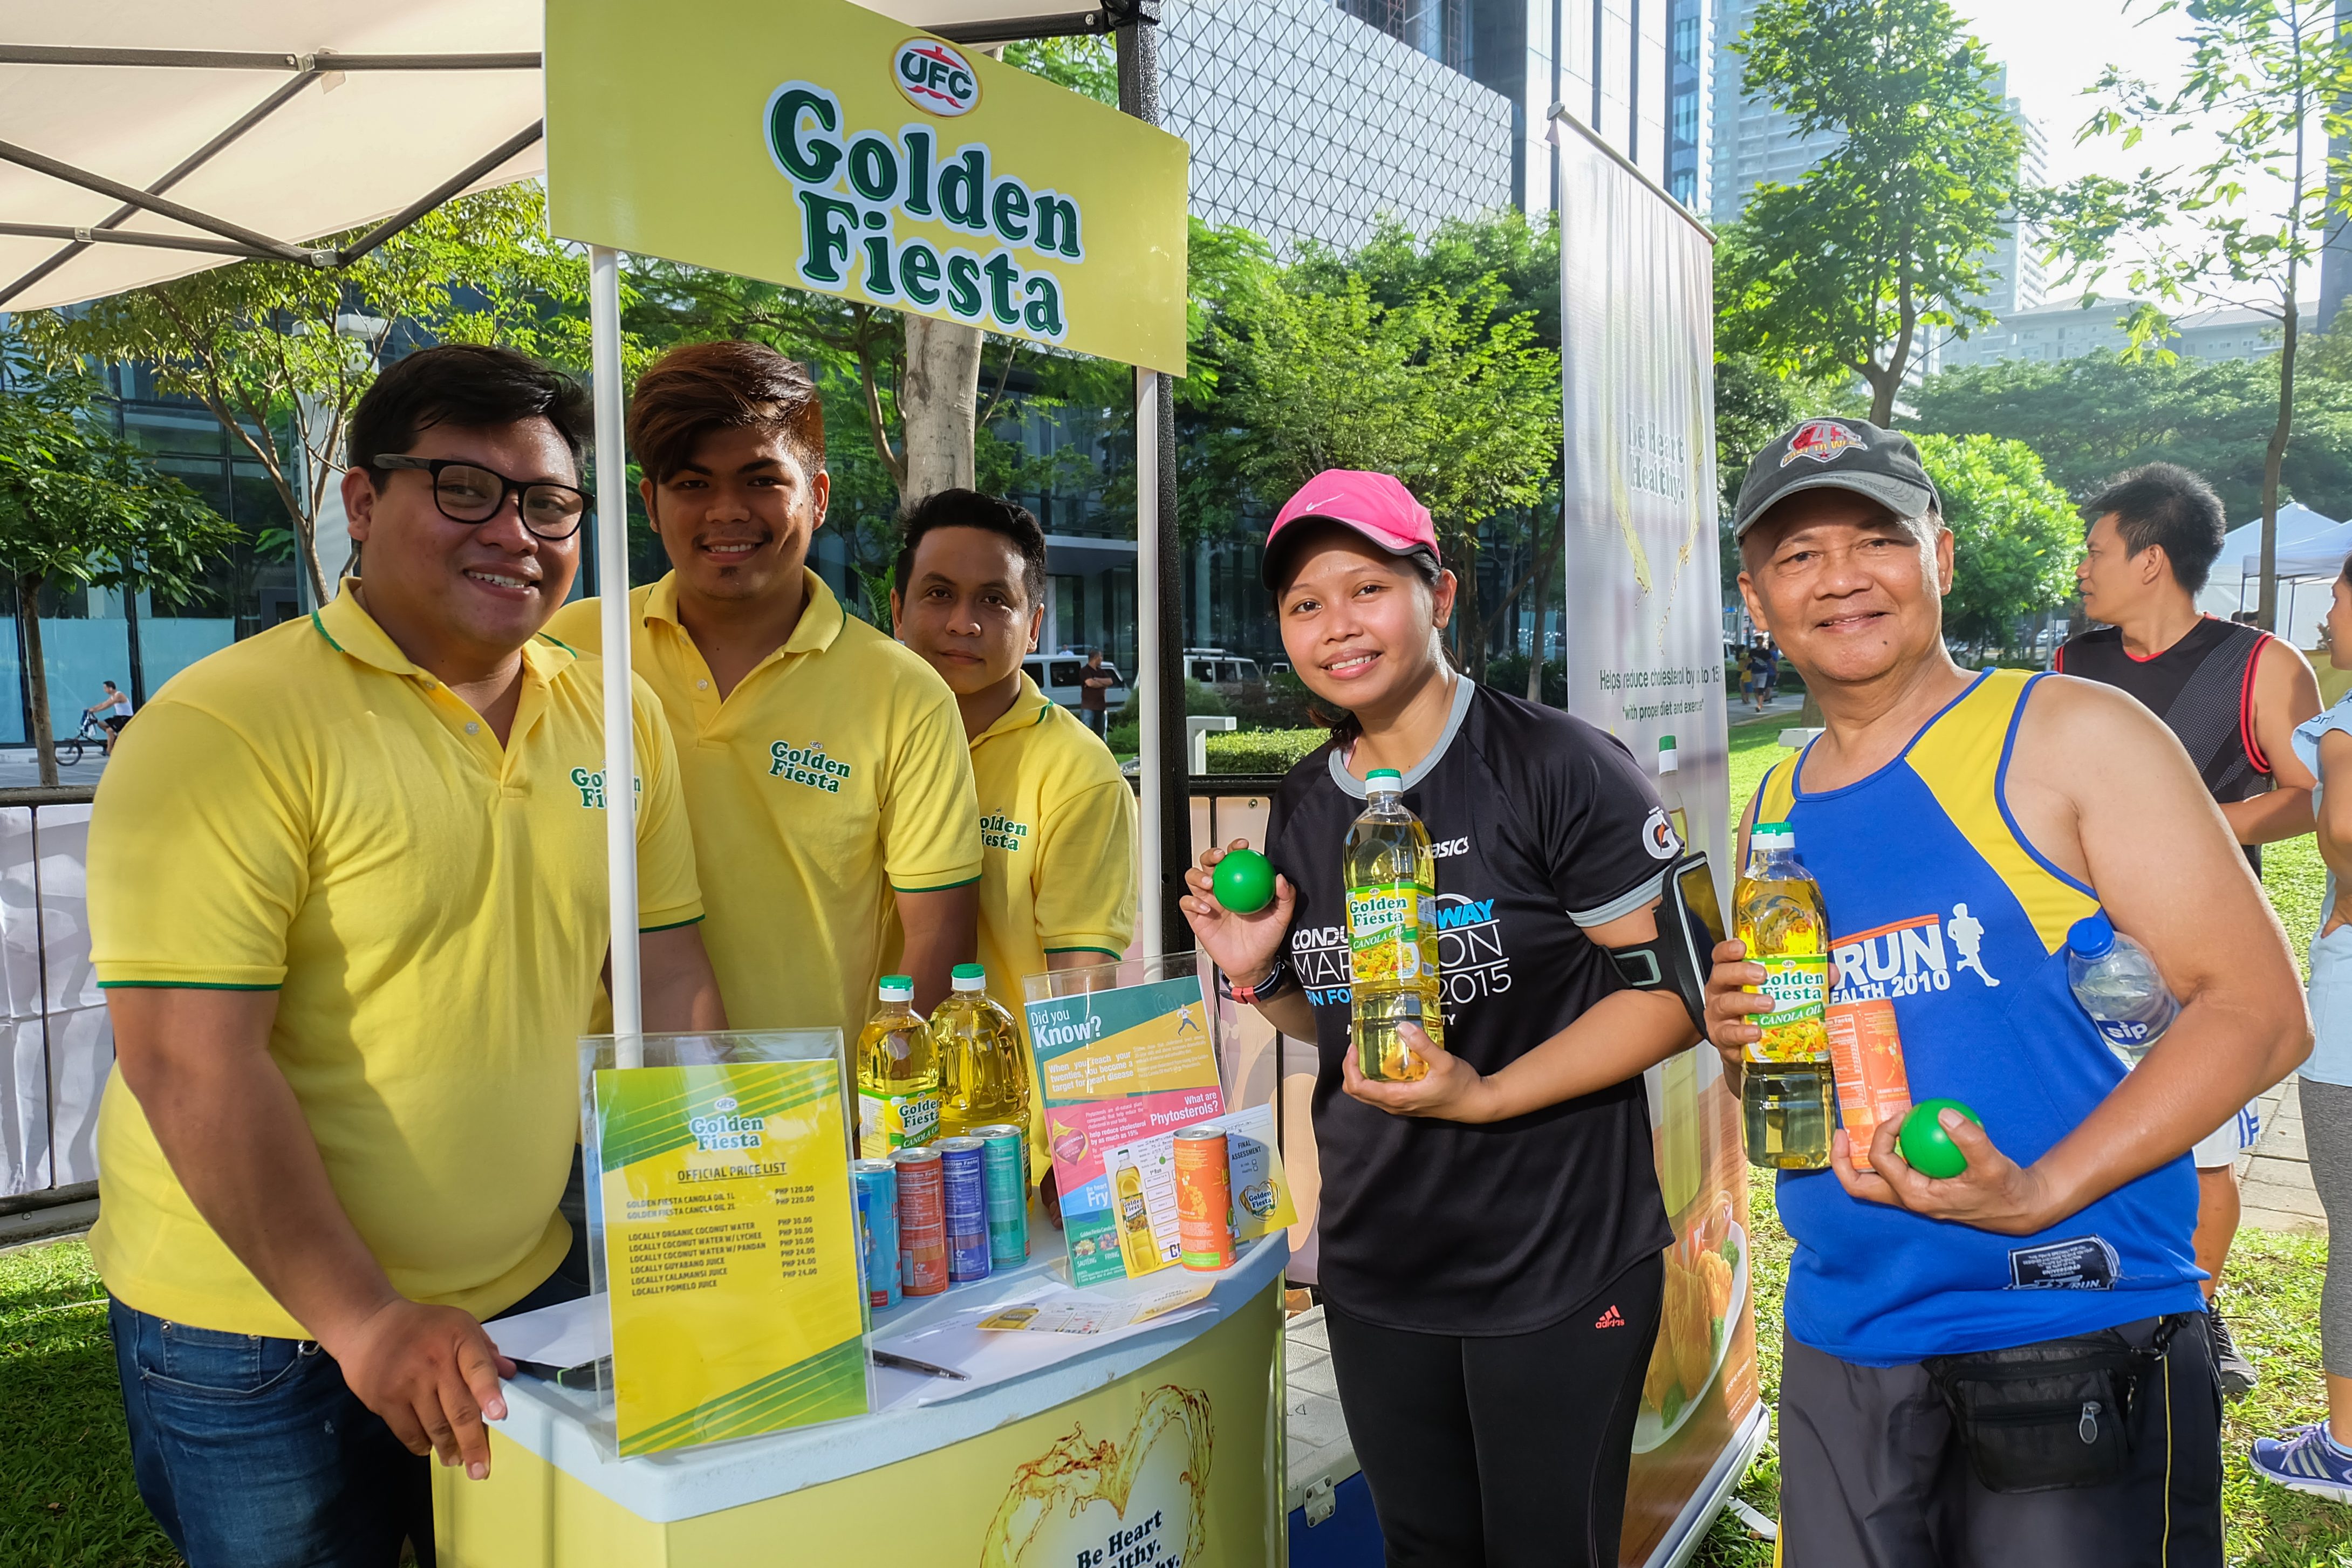 HEART-HEALTHY MORNING. Participants claim their Golden Fiesta freebies after accomplishing the exercises. Photo by Danna Peña 